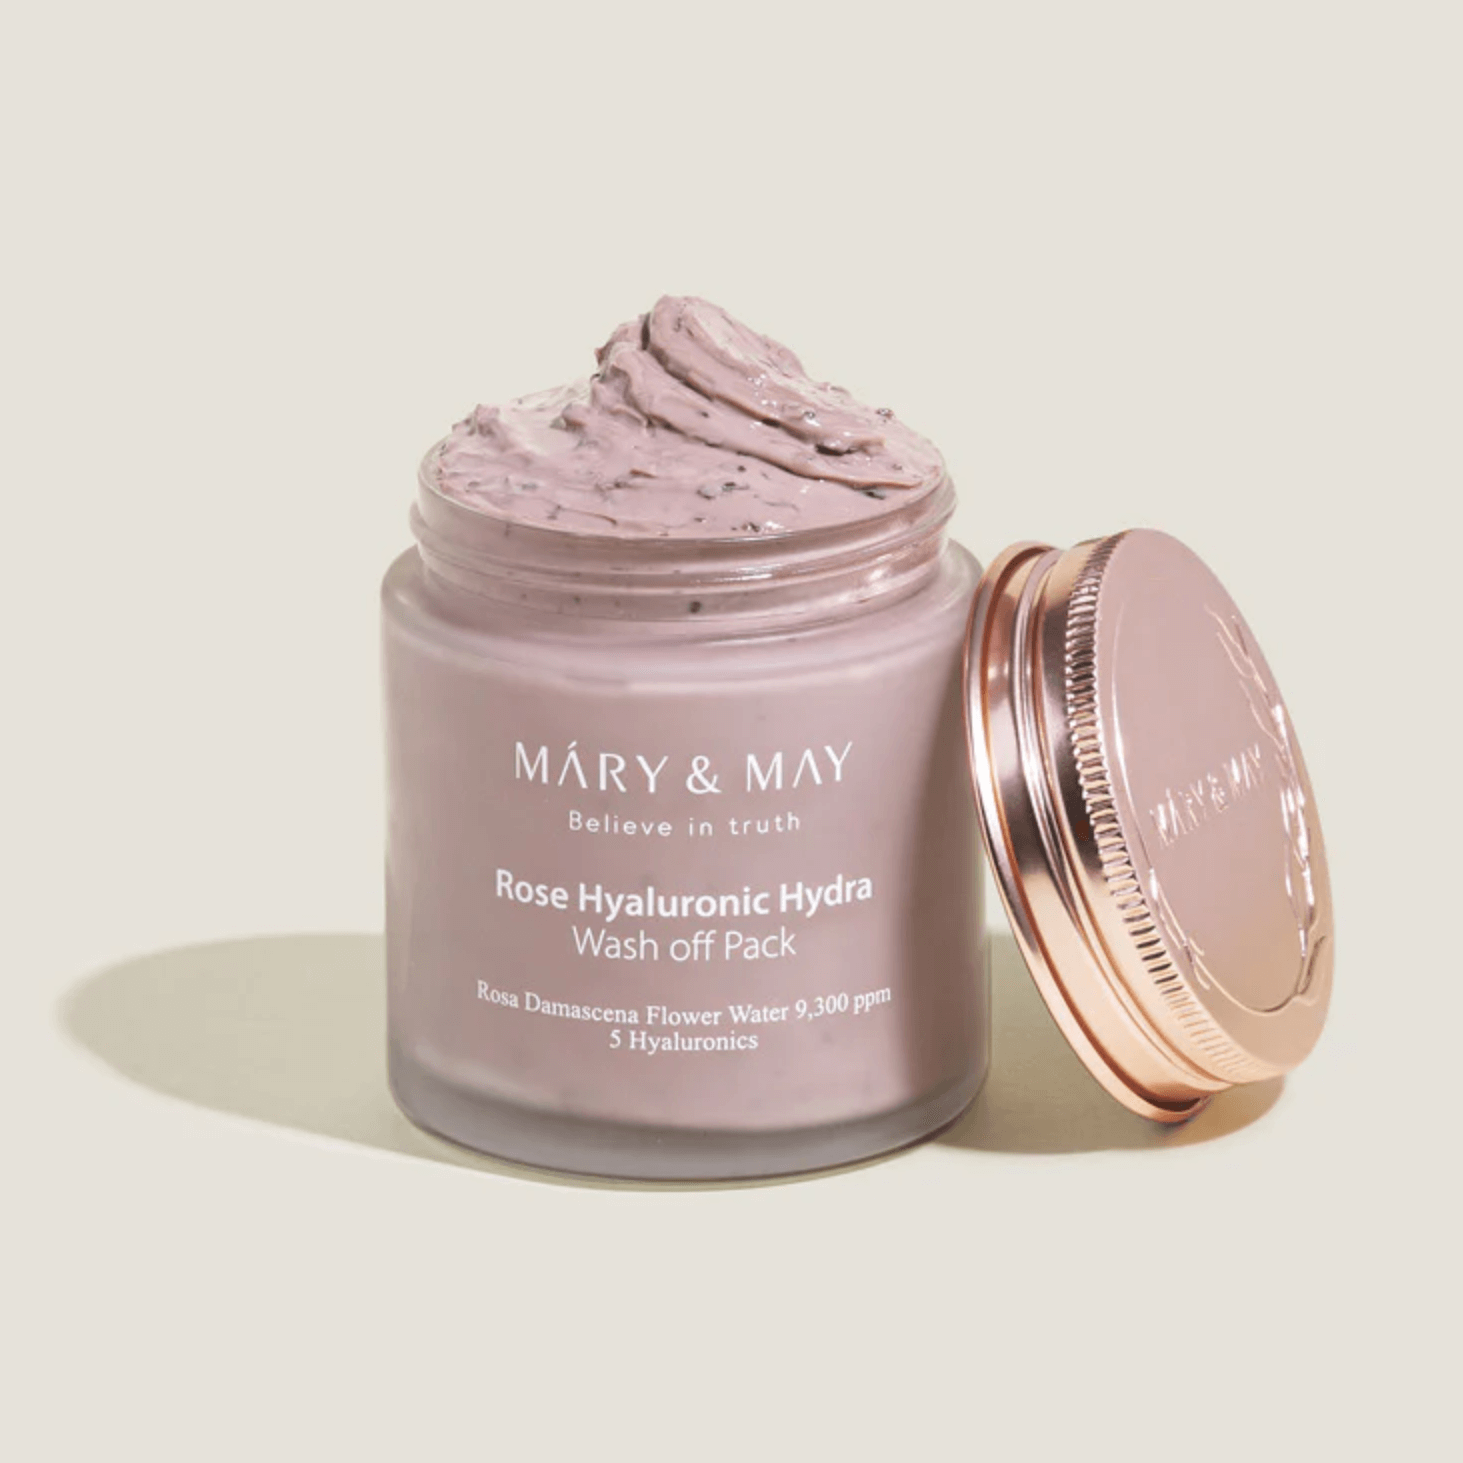 Mary & May Rose Hyaluronic Hydra Wash Off Pack Mary&May